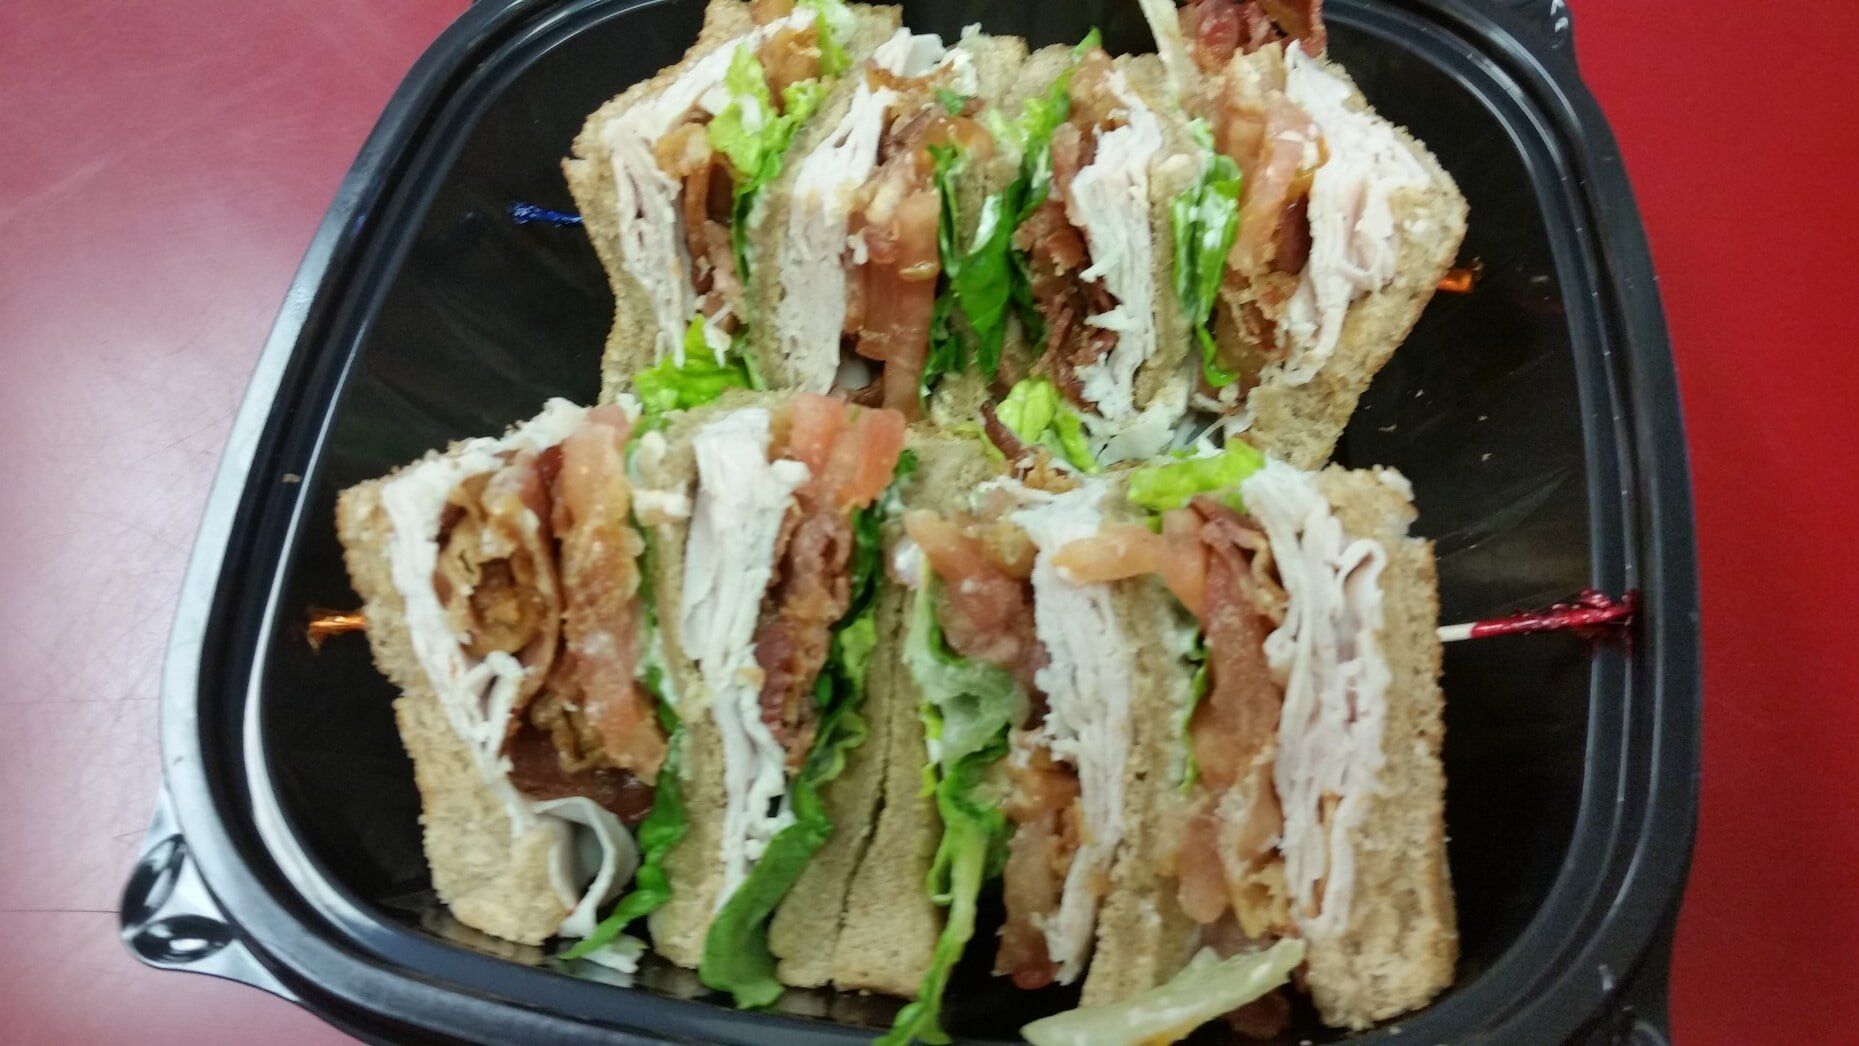 Turkey Club - New York Style Pizza in Catonsville, MD